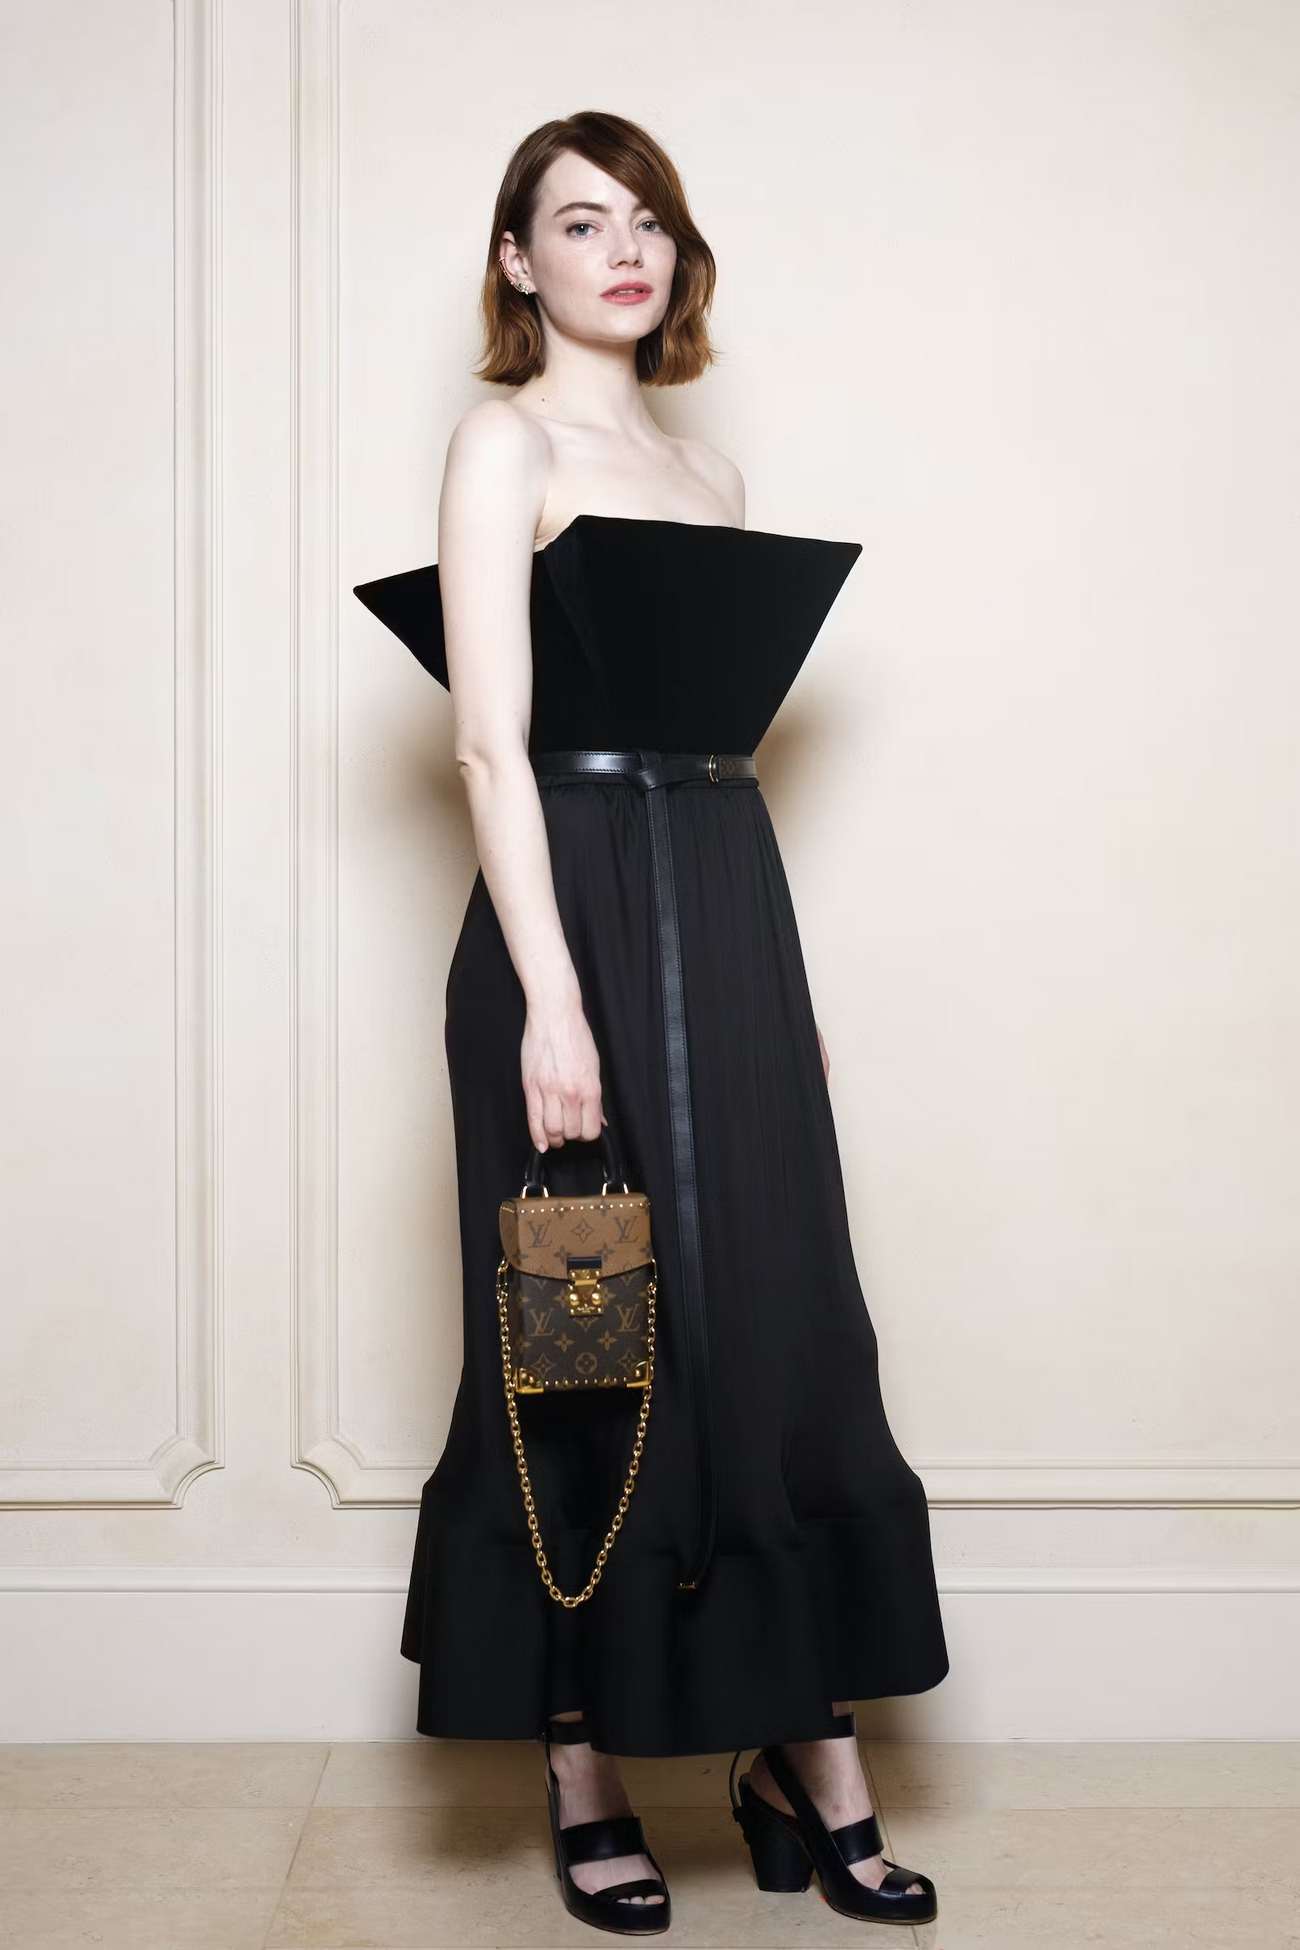 Emma Stone Poses for Louis Vuitton private dinner at the Hotel Ritz on June 08